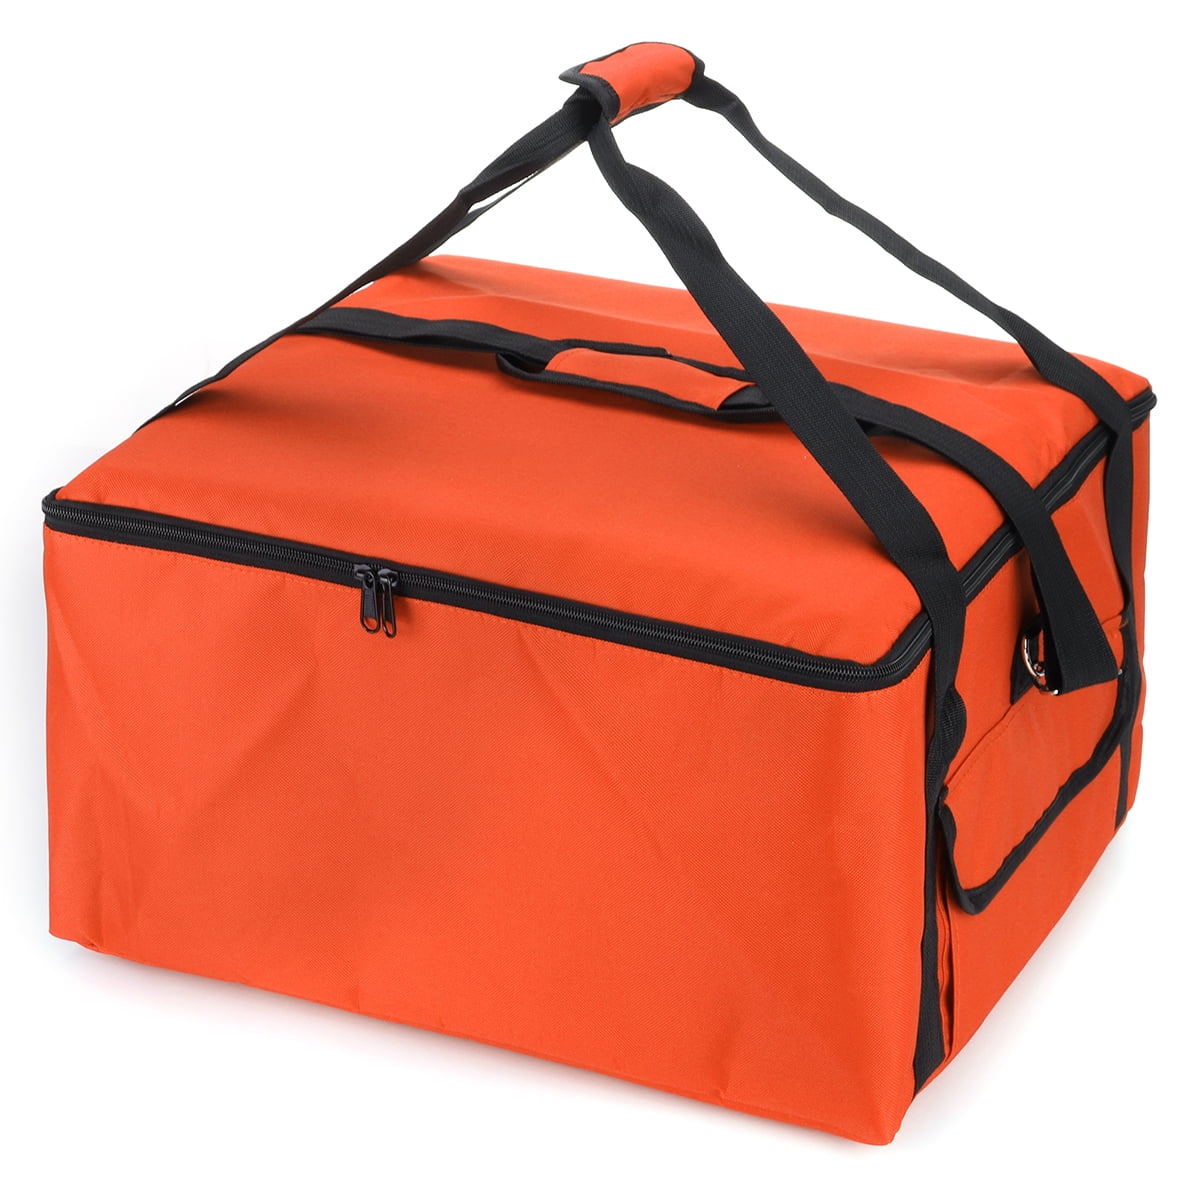 Pizza Delivery Bag Insulated Thermal Food Storage Holder Travel Picnic Bag